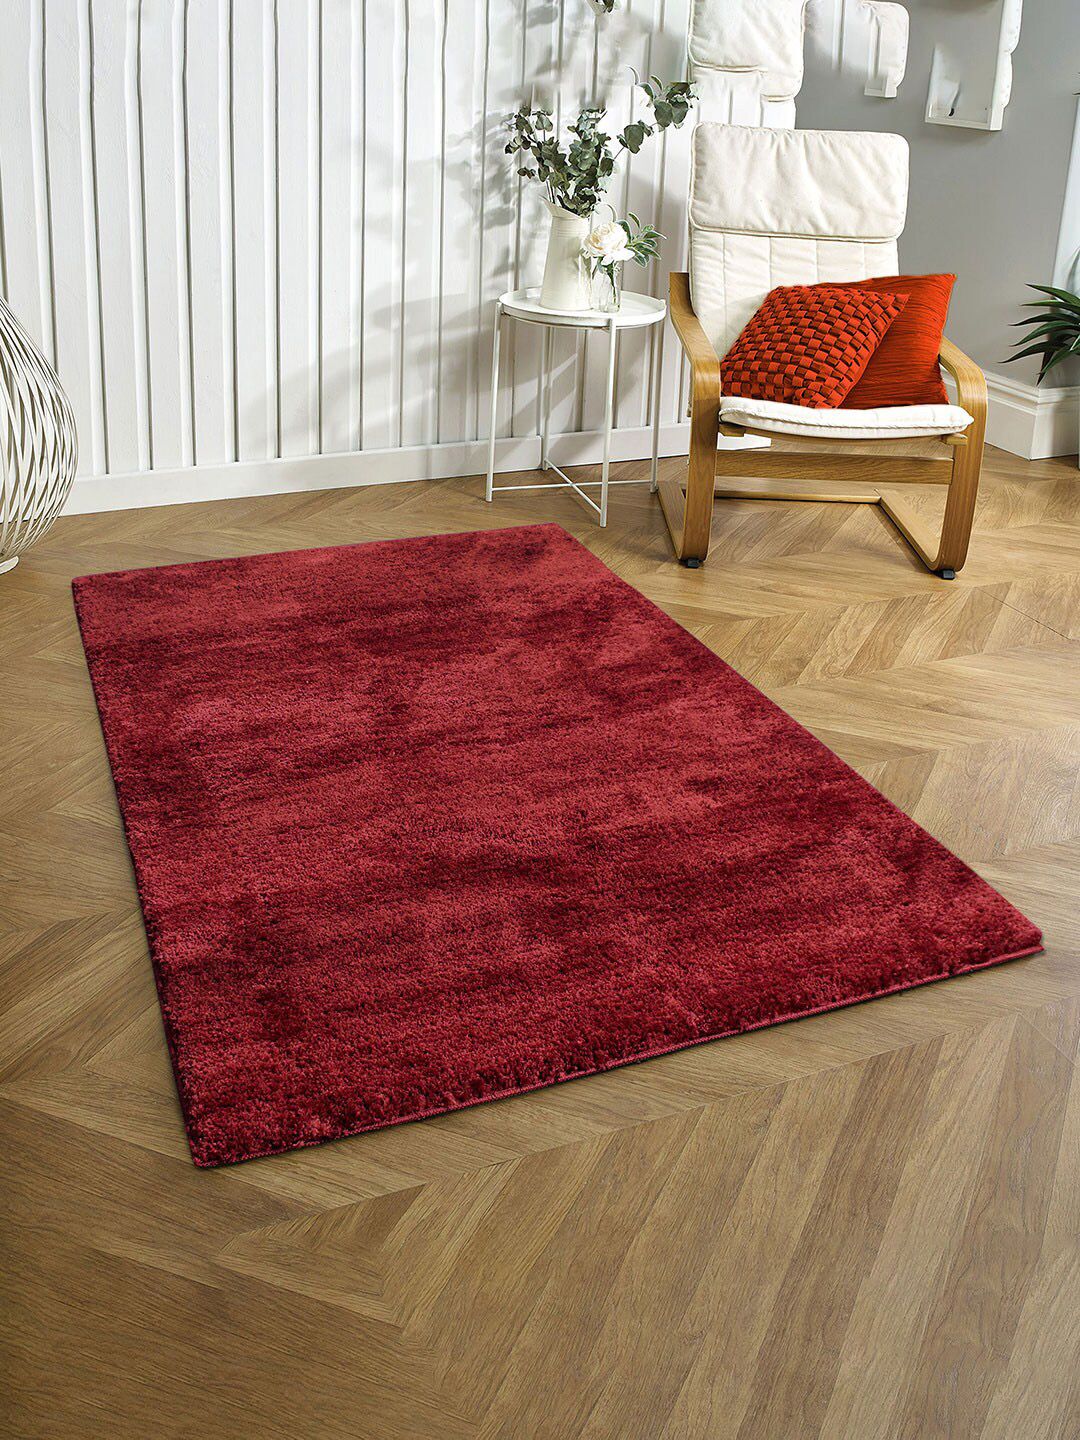 LUXEHOME INTERNATIONAL Maroon Solid Shaggy  Anti-Skid Carpet Price in India